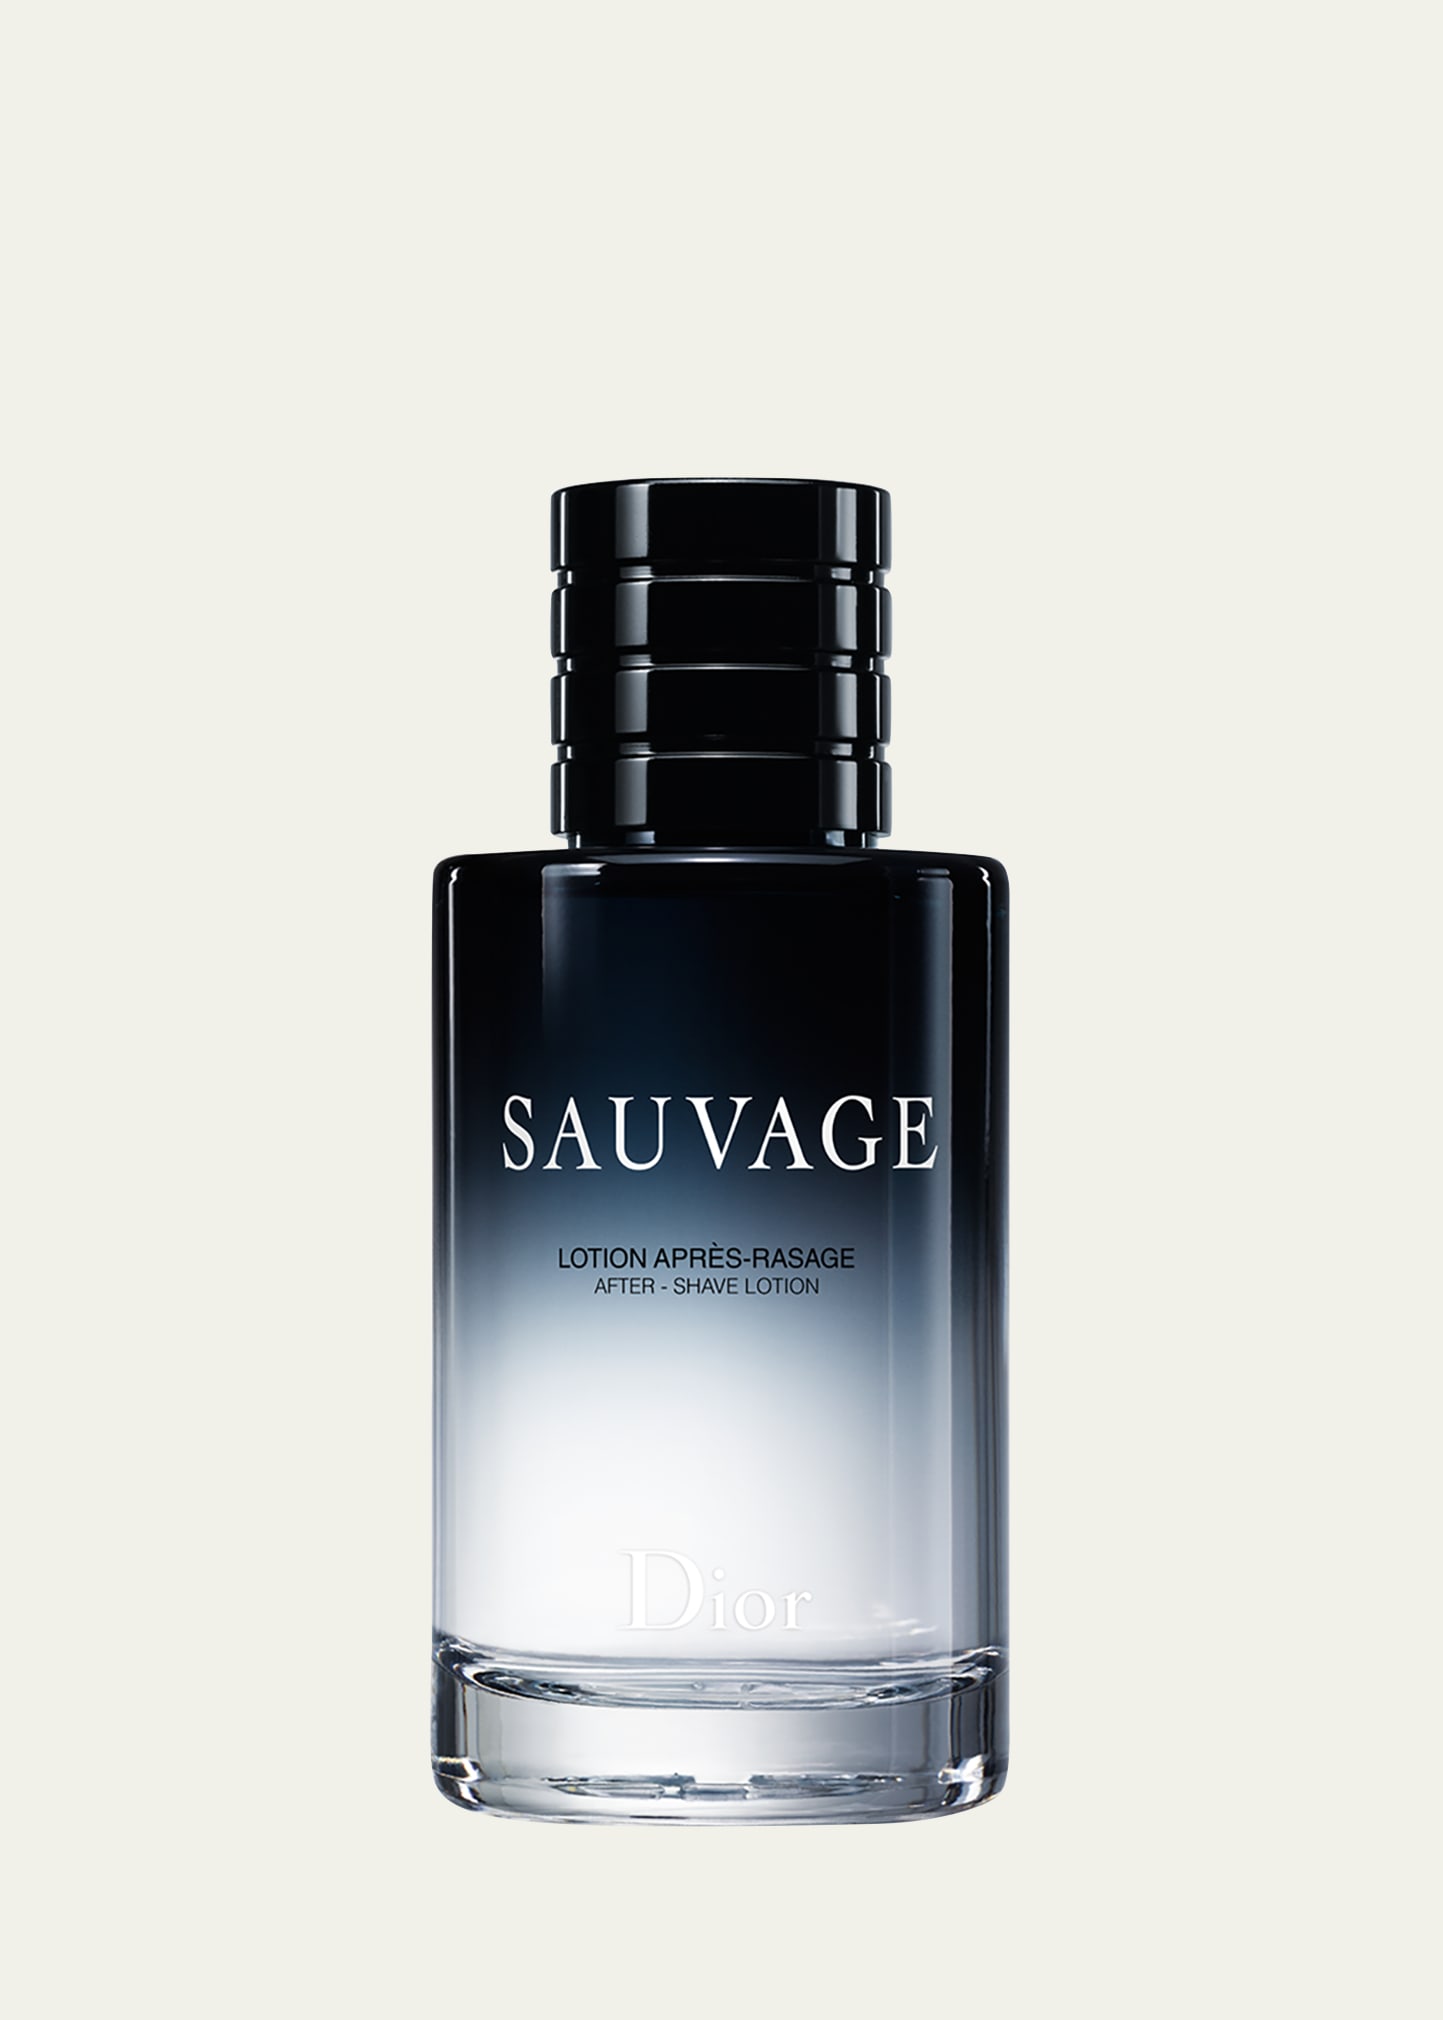 Sauvage After-Shave Lotion, 3.4 oz.